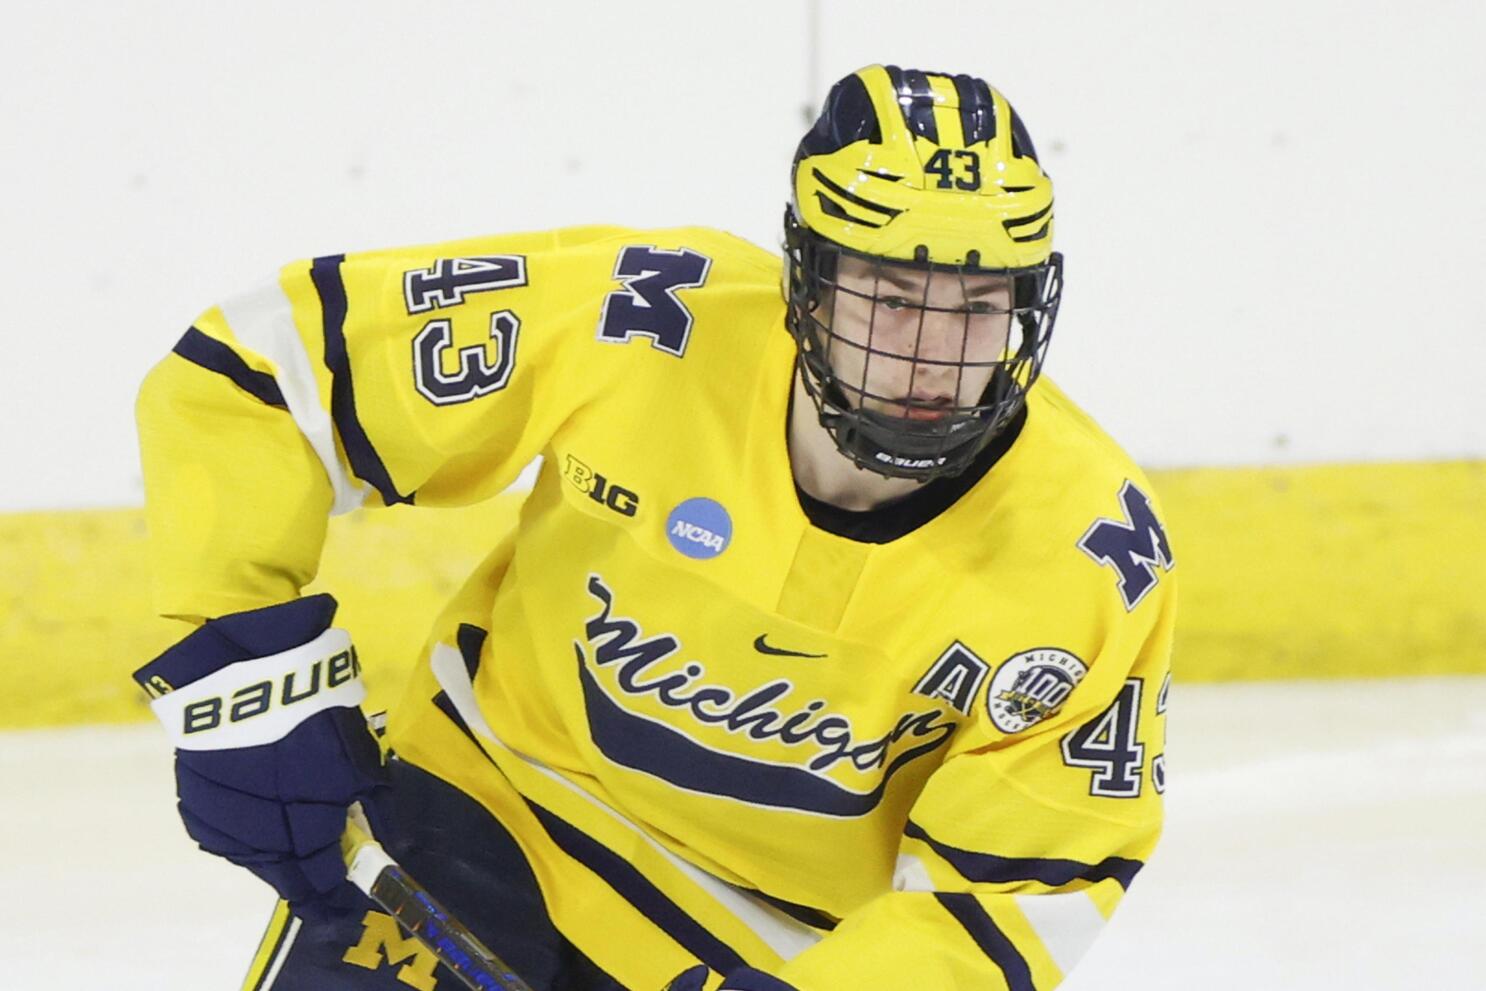 Devils select U.S. center Jack Hughes with 1st pick in NHL draft